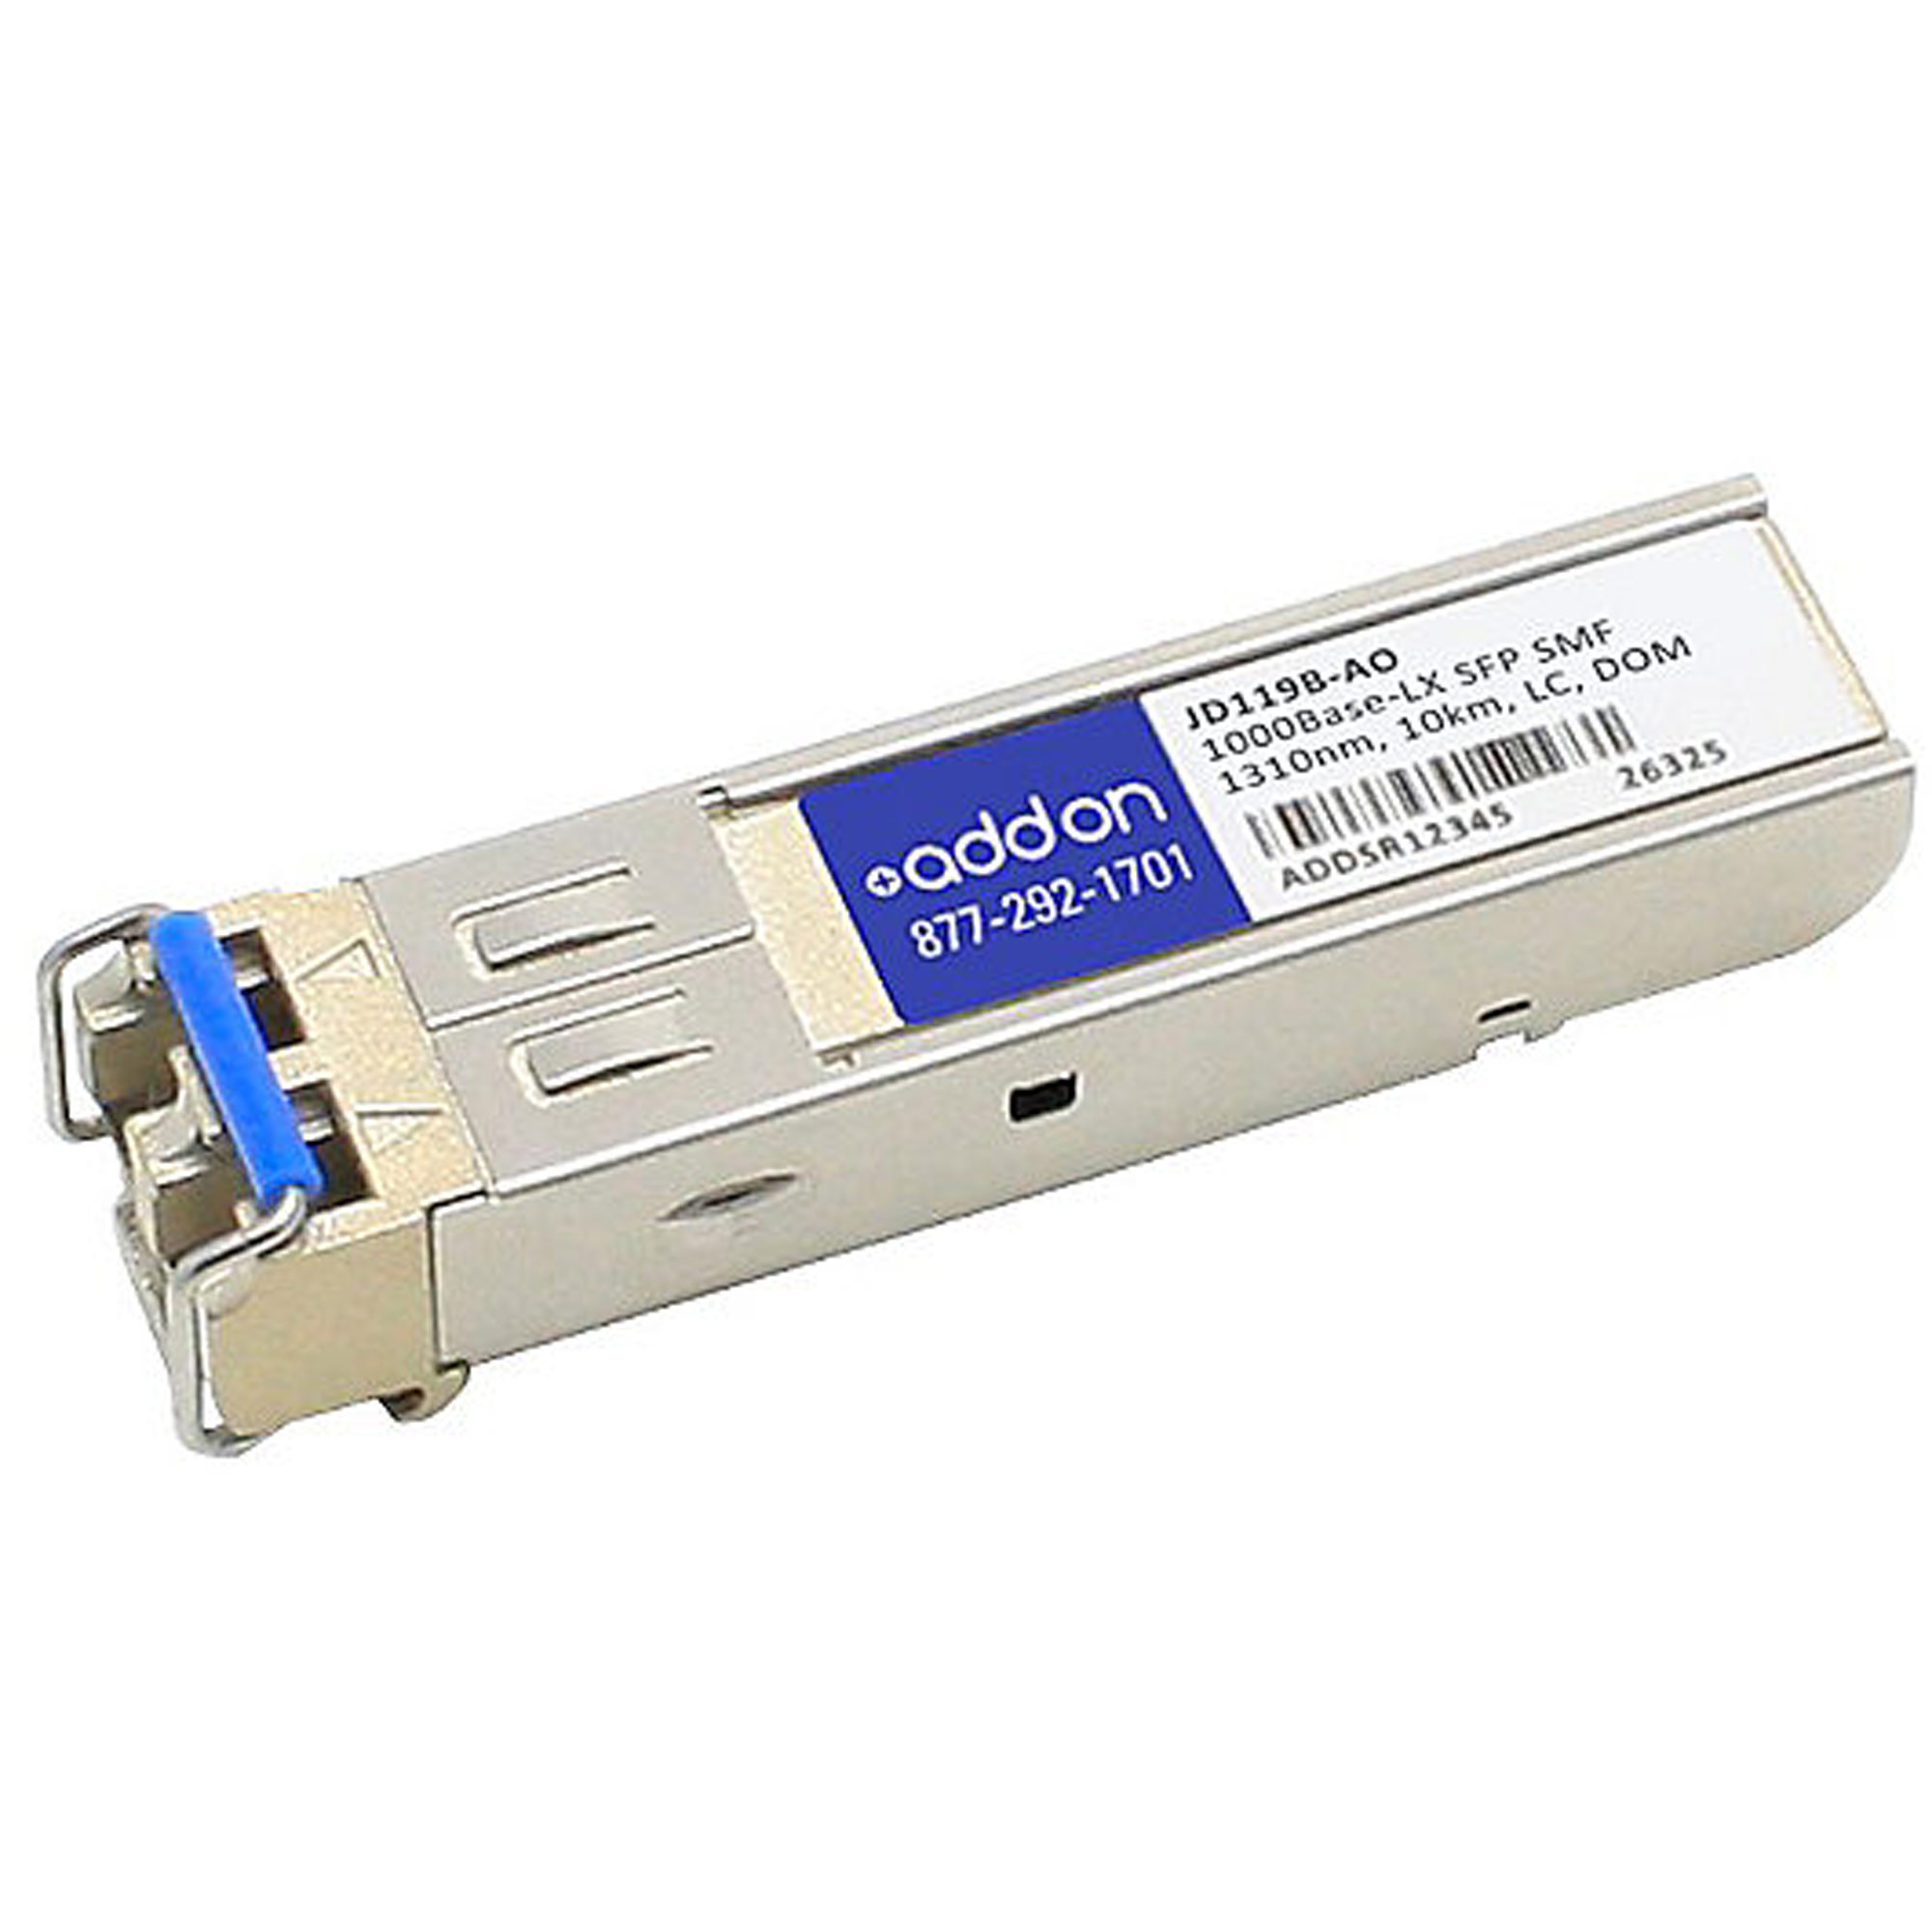 Ixia 1G SFP Fiber Transceiver Kit 1310nm, 8.5um, with cable, for use with xStream, Directo